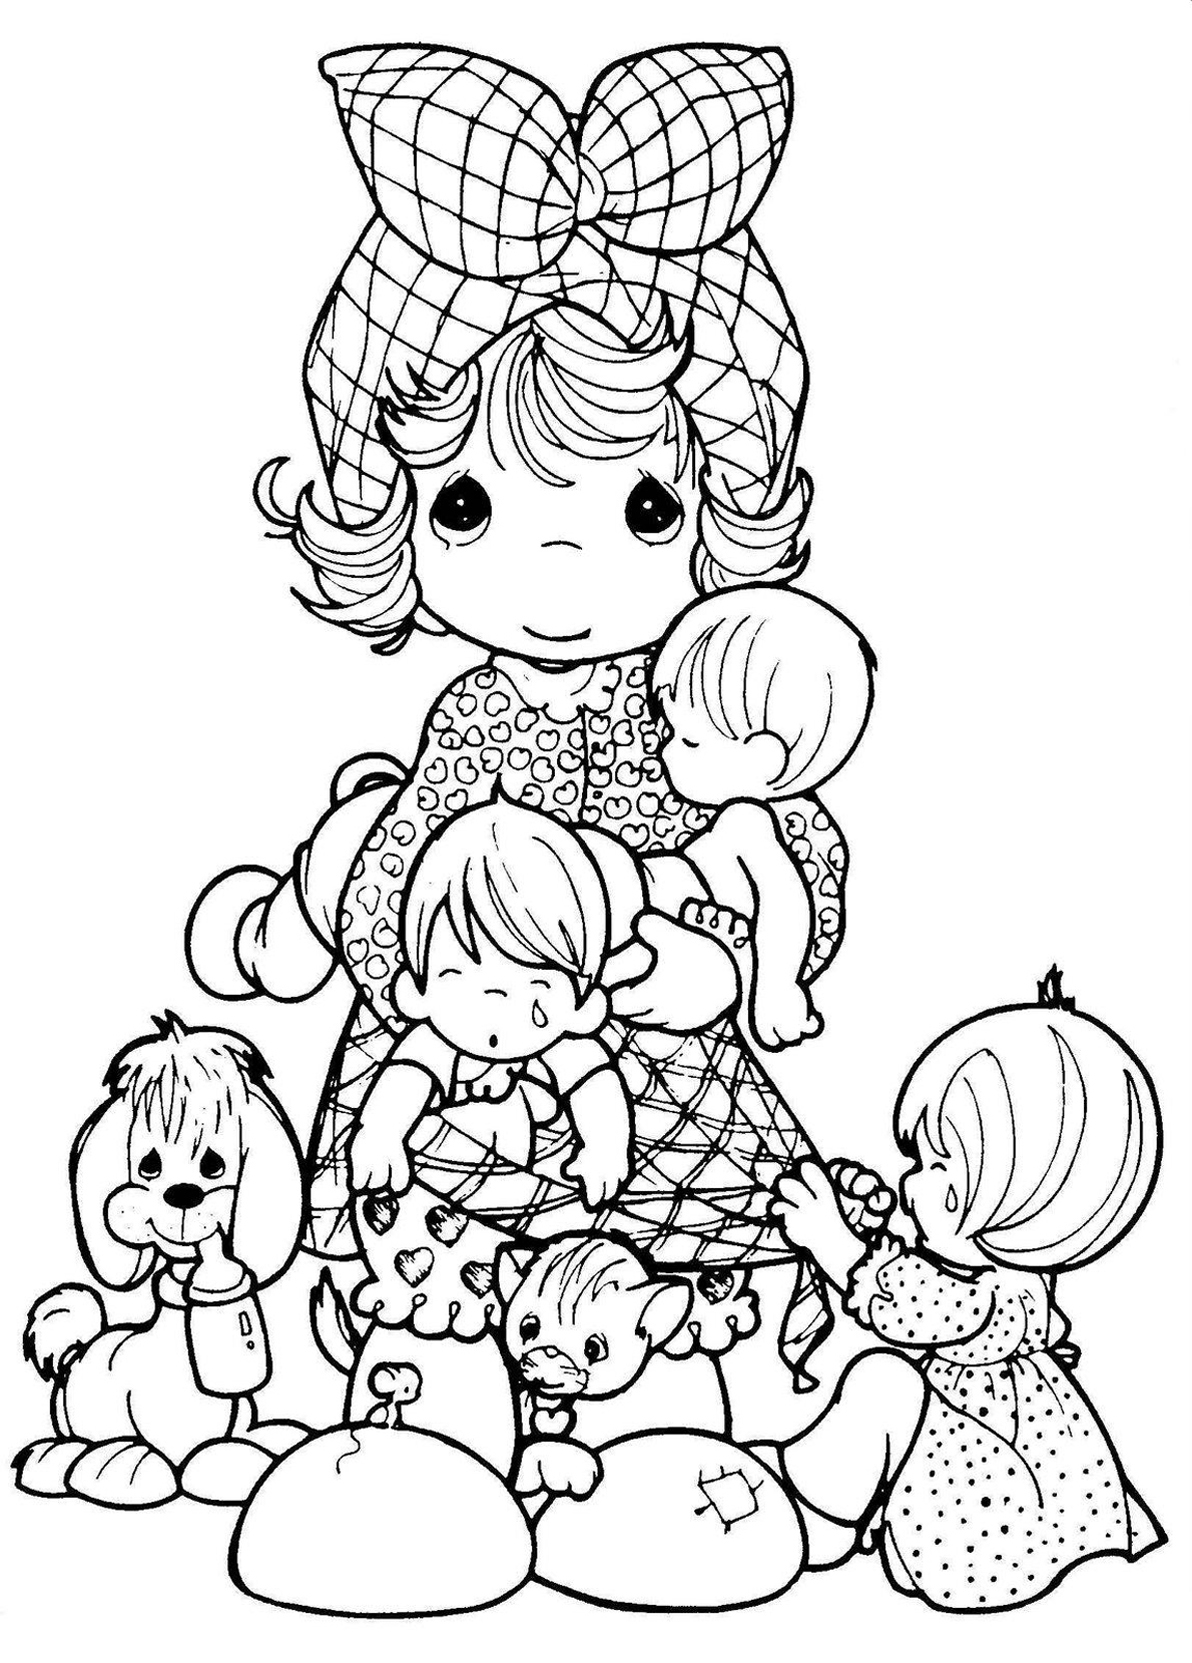 Download Precious moments - Vintage Adult Coloring Pages